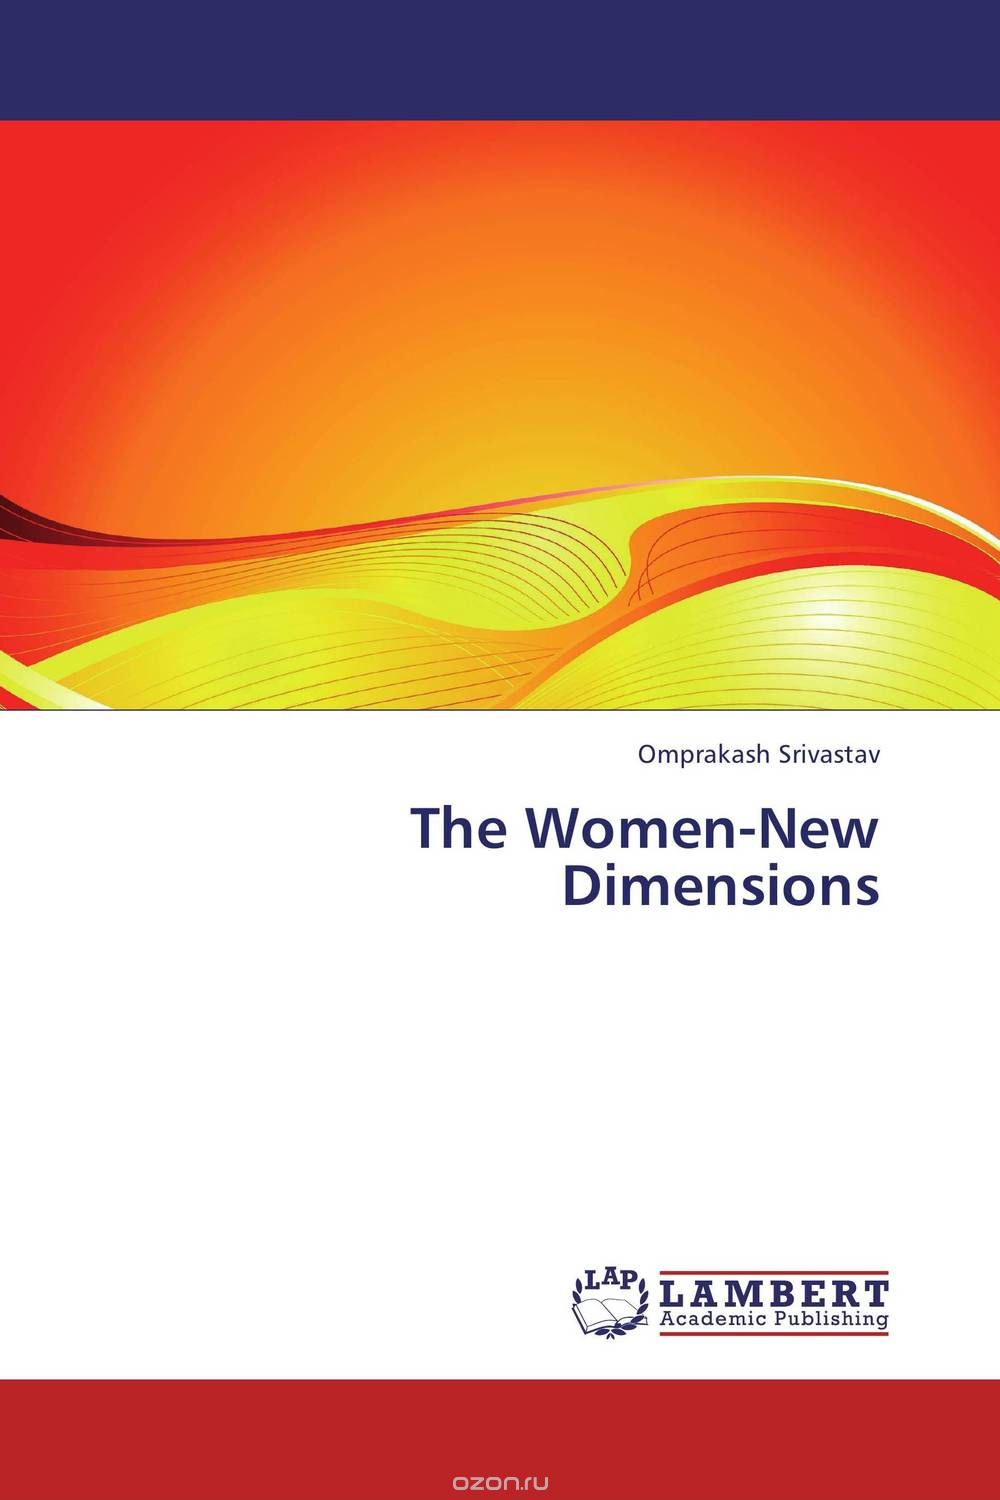 The Women-New Dimensions